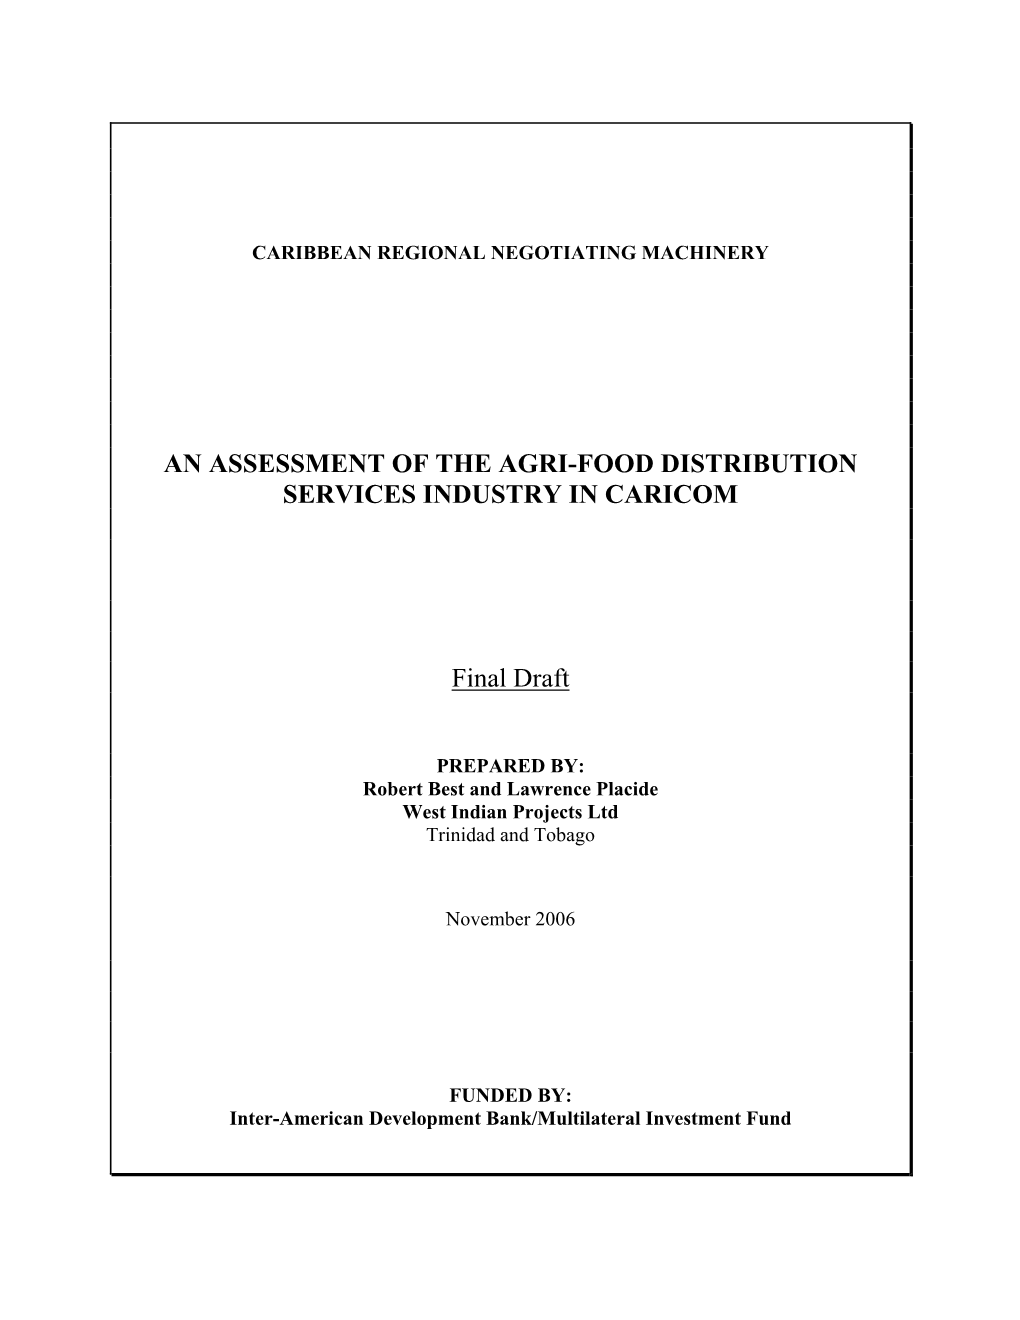 An Assessment of the Agri-Food Distribution Services Industry in Caricom